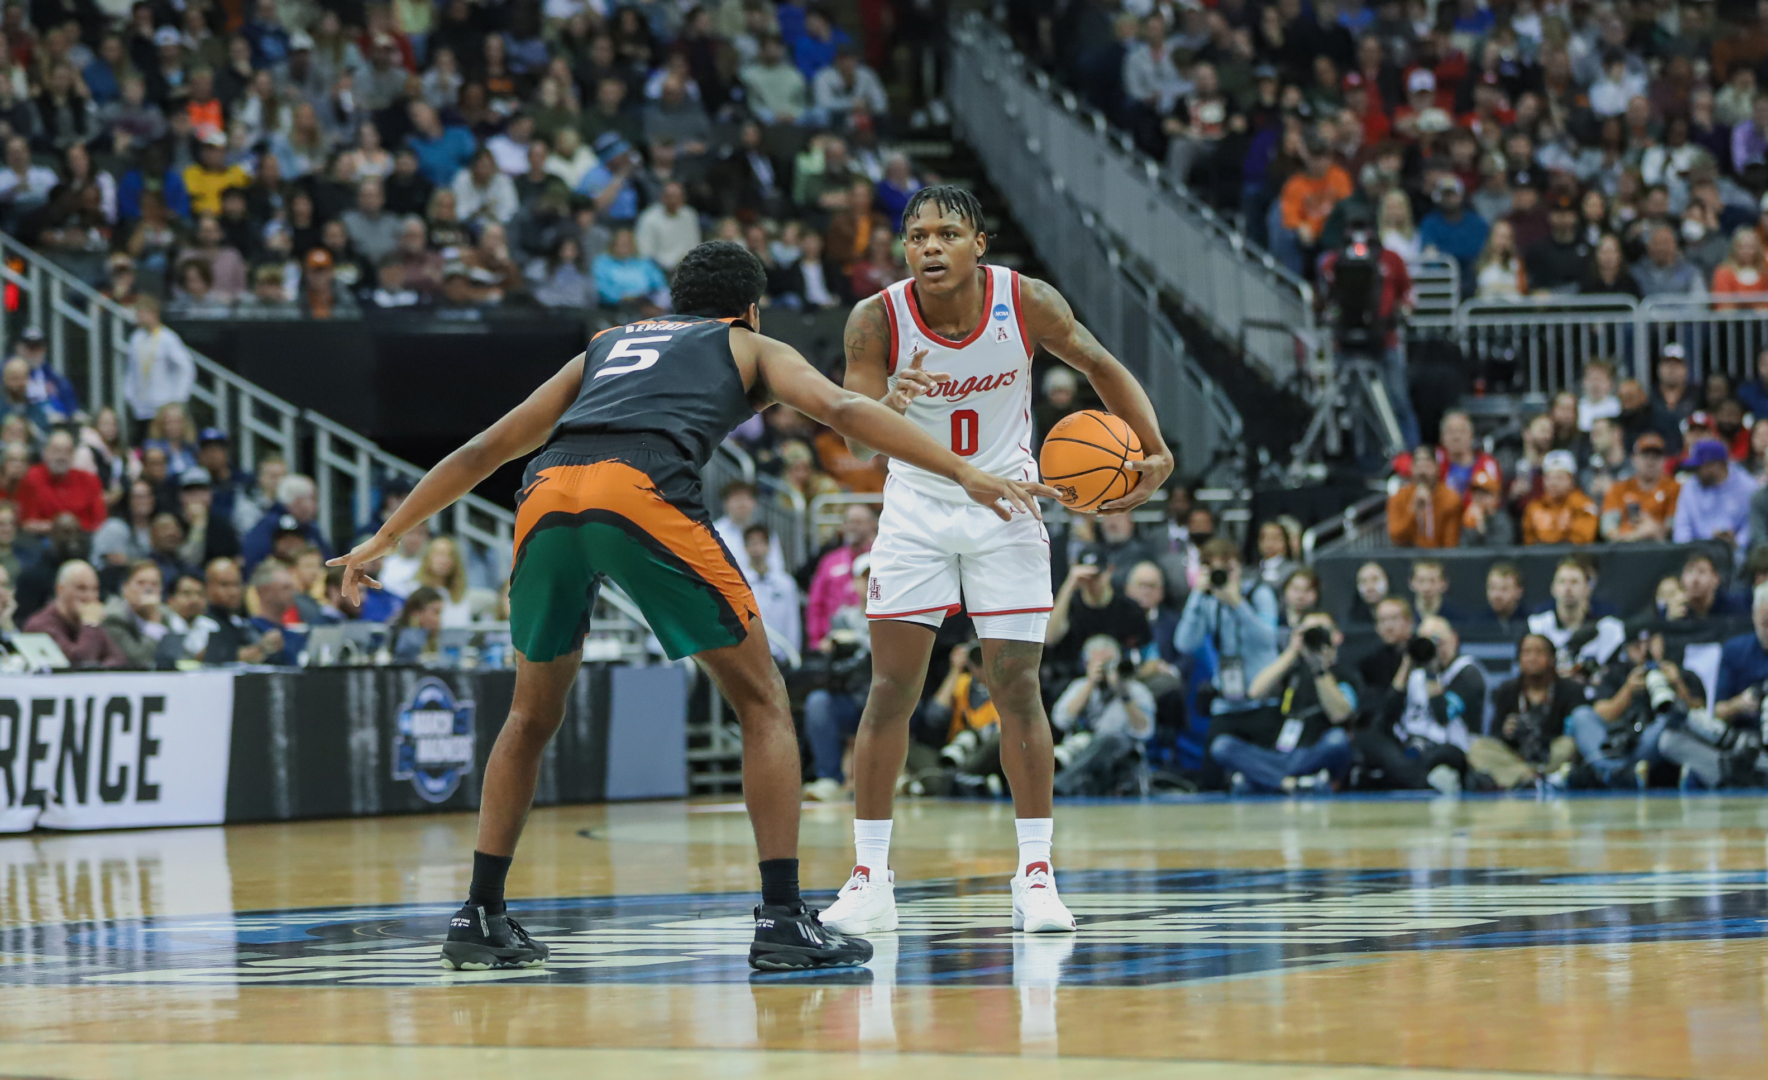 The music came to an end for Houston on Friday night in Kansas City, Mo., as the Cougars, the Midwest Region's No. 1 seed, fell to No. 5 seed Miami in the Sweet 16 at T-Mobile Center. | Anh Le/The Cougar